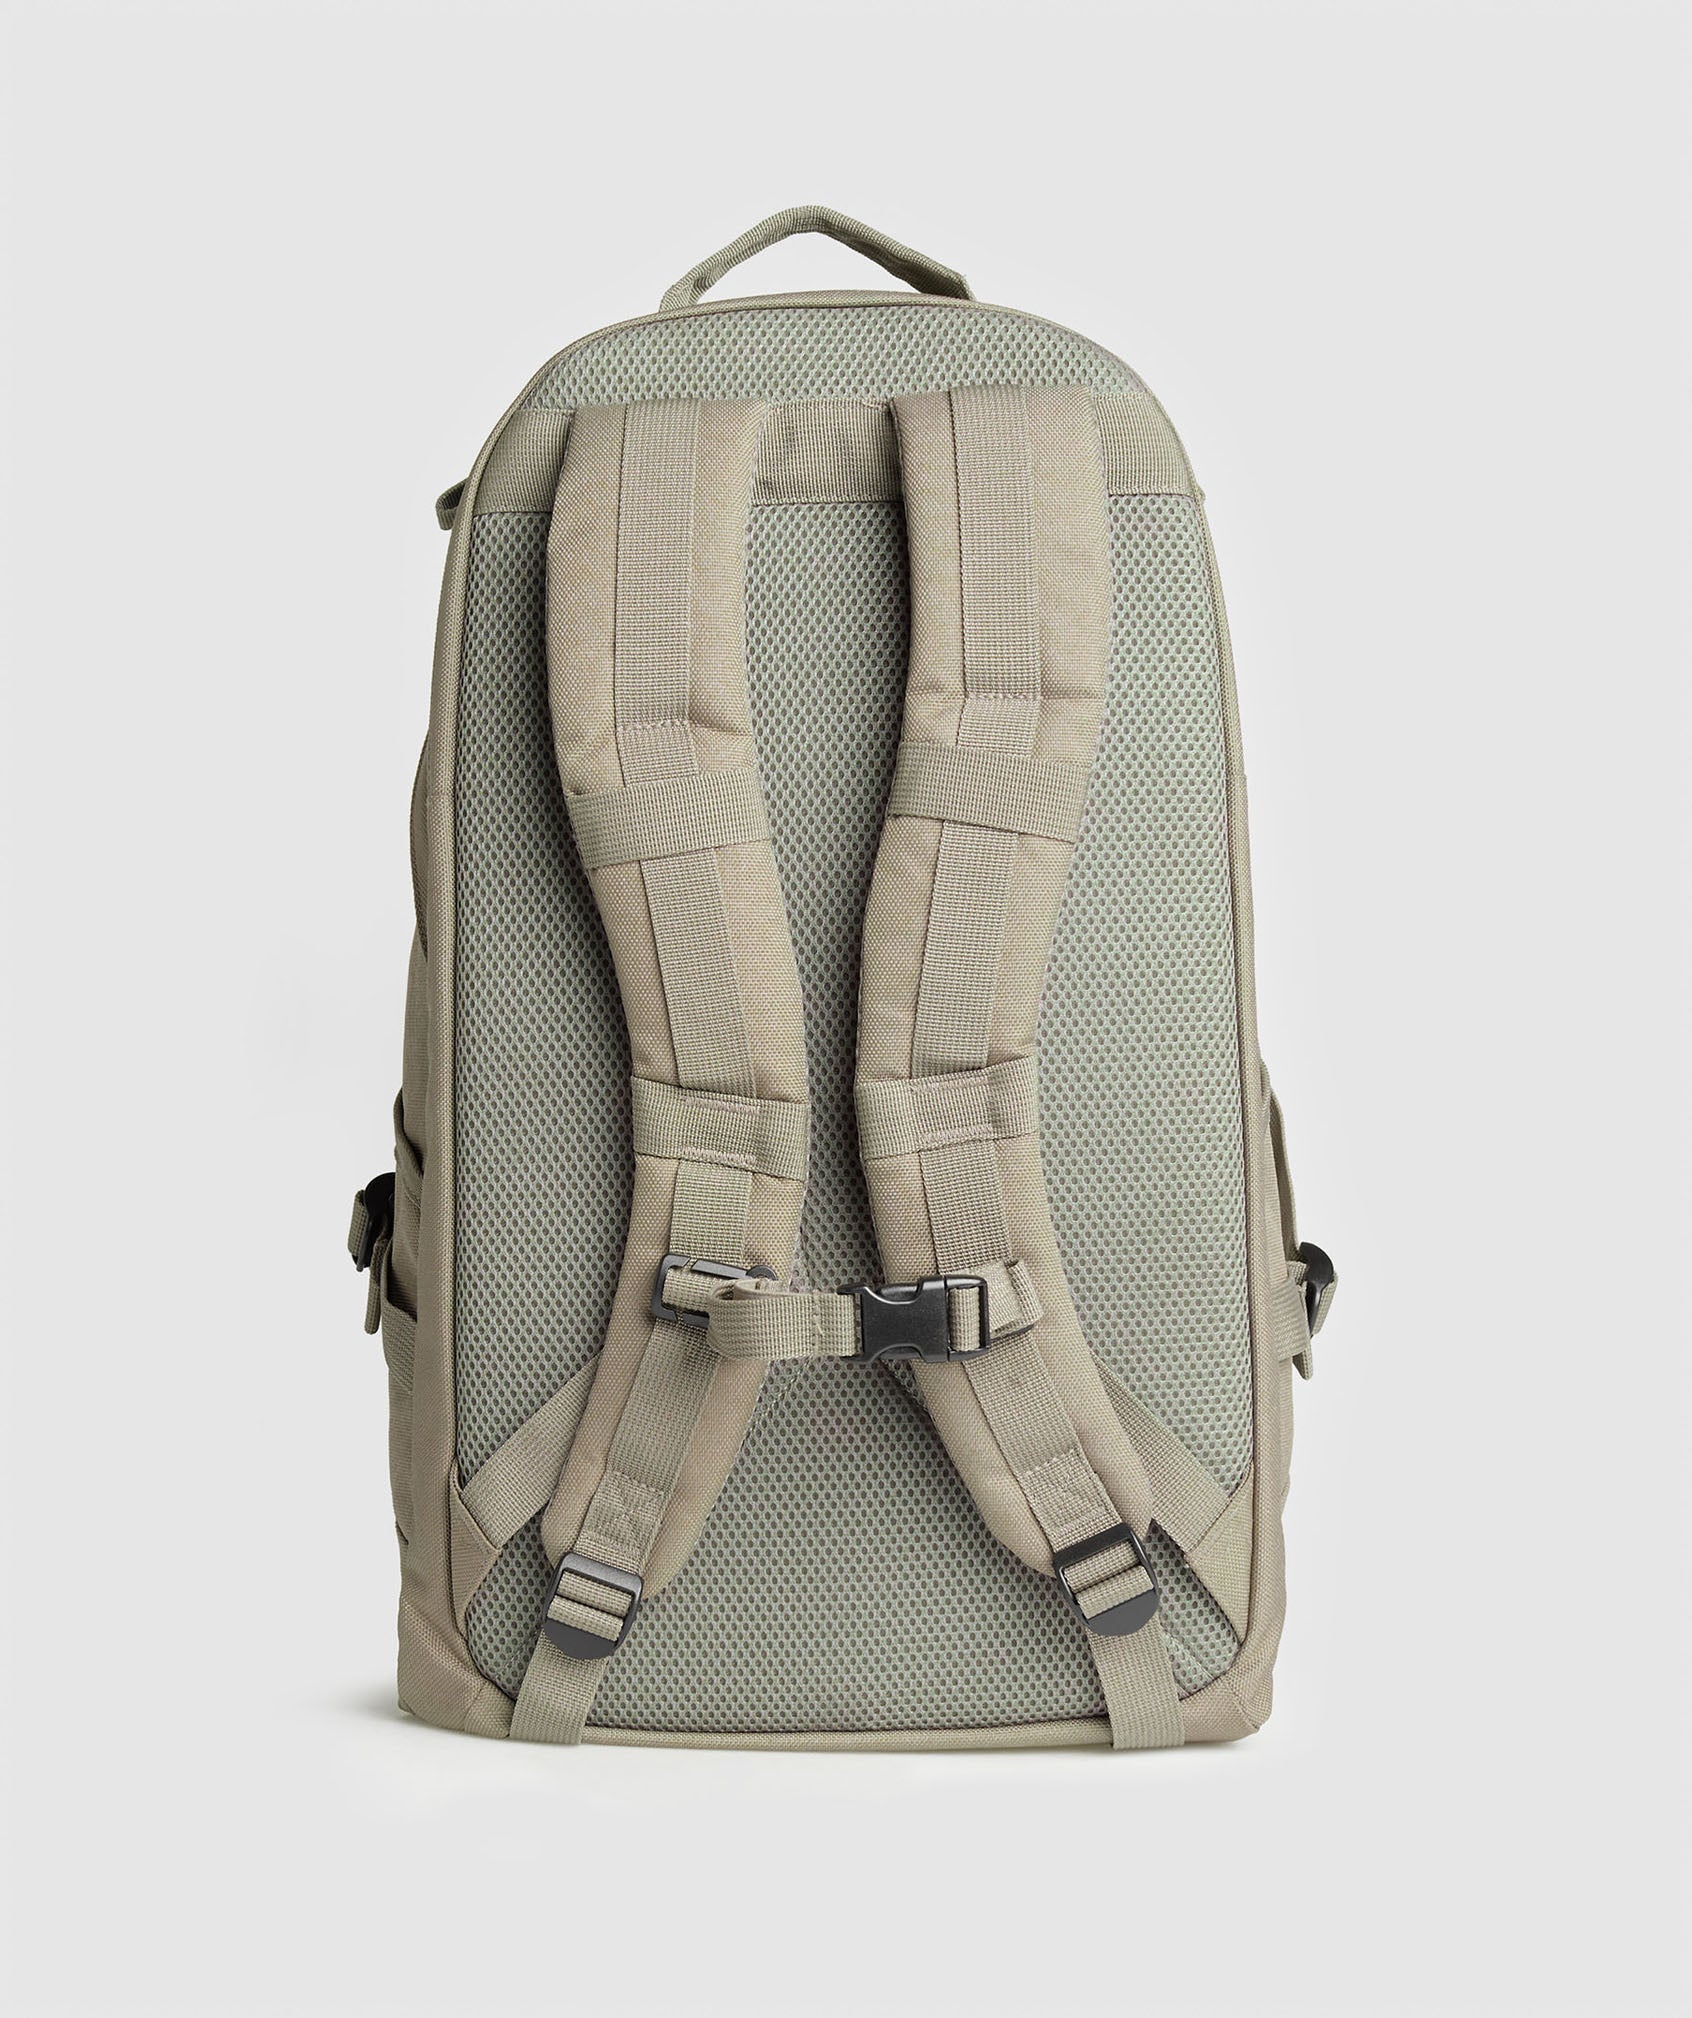 Pursuit Backpack in Brown - view 2